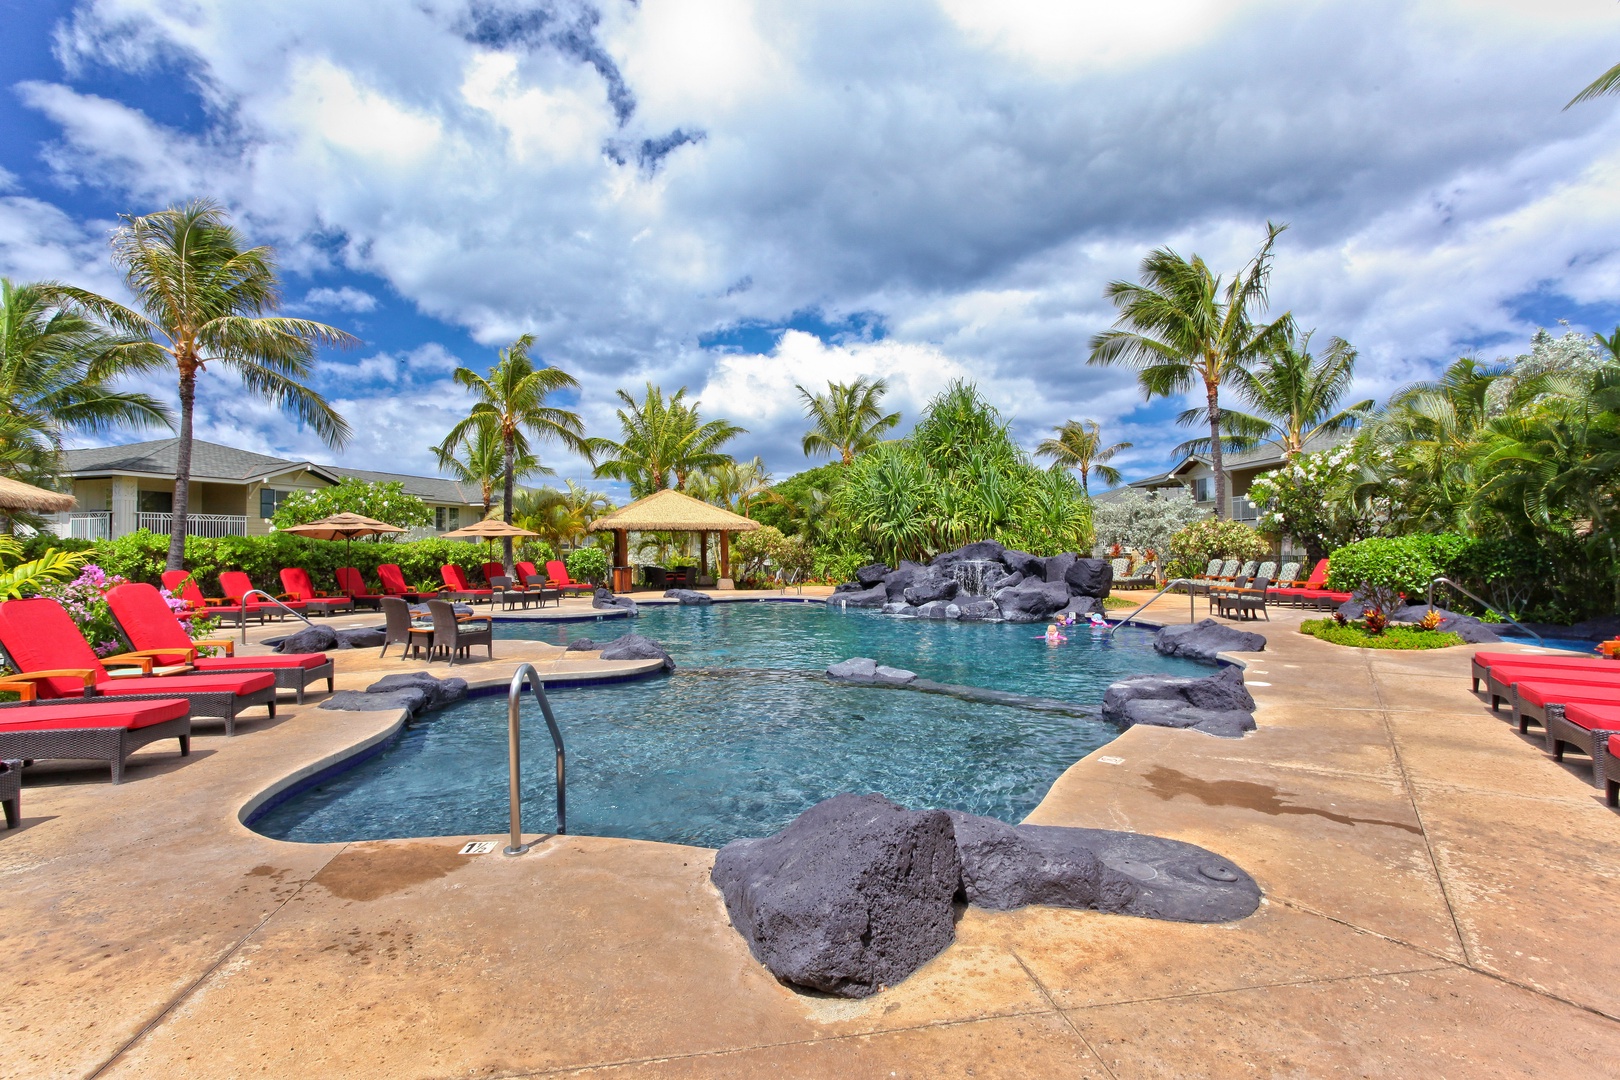 Kapolei Vacation Rentals, Ko Olina Kai 1051D - Lounge by the crystal blue waters of the pool.